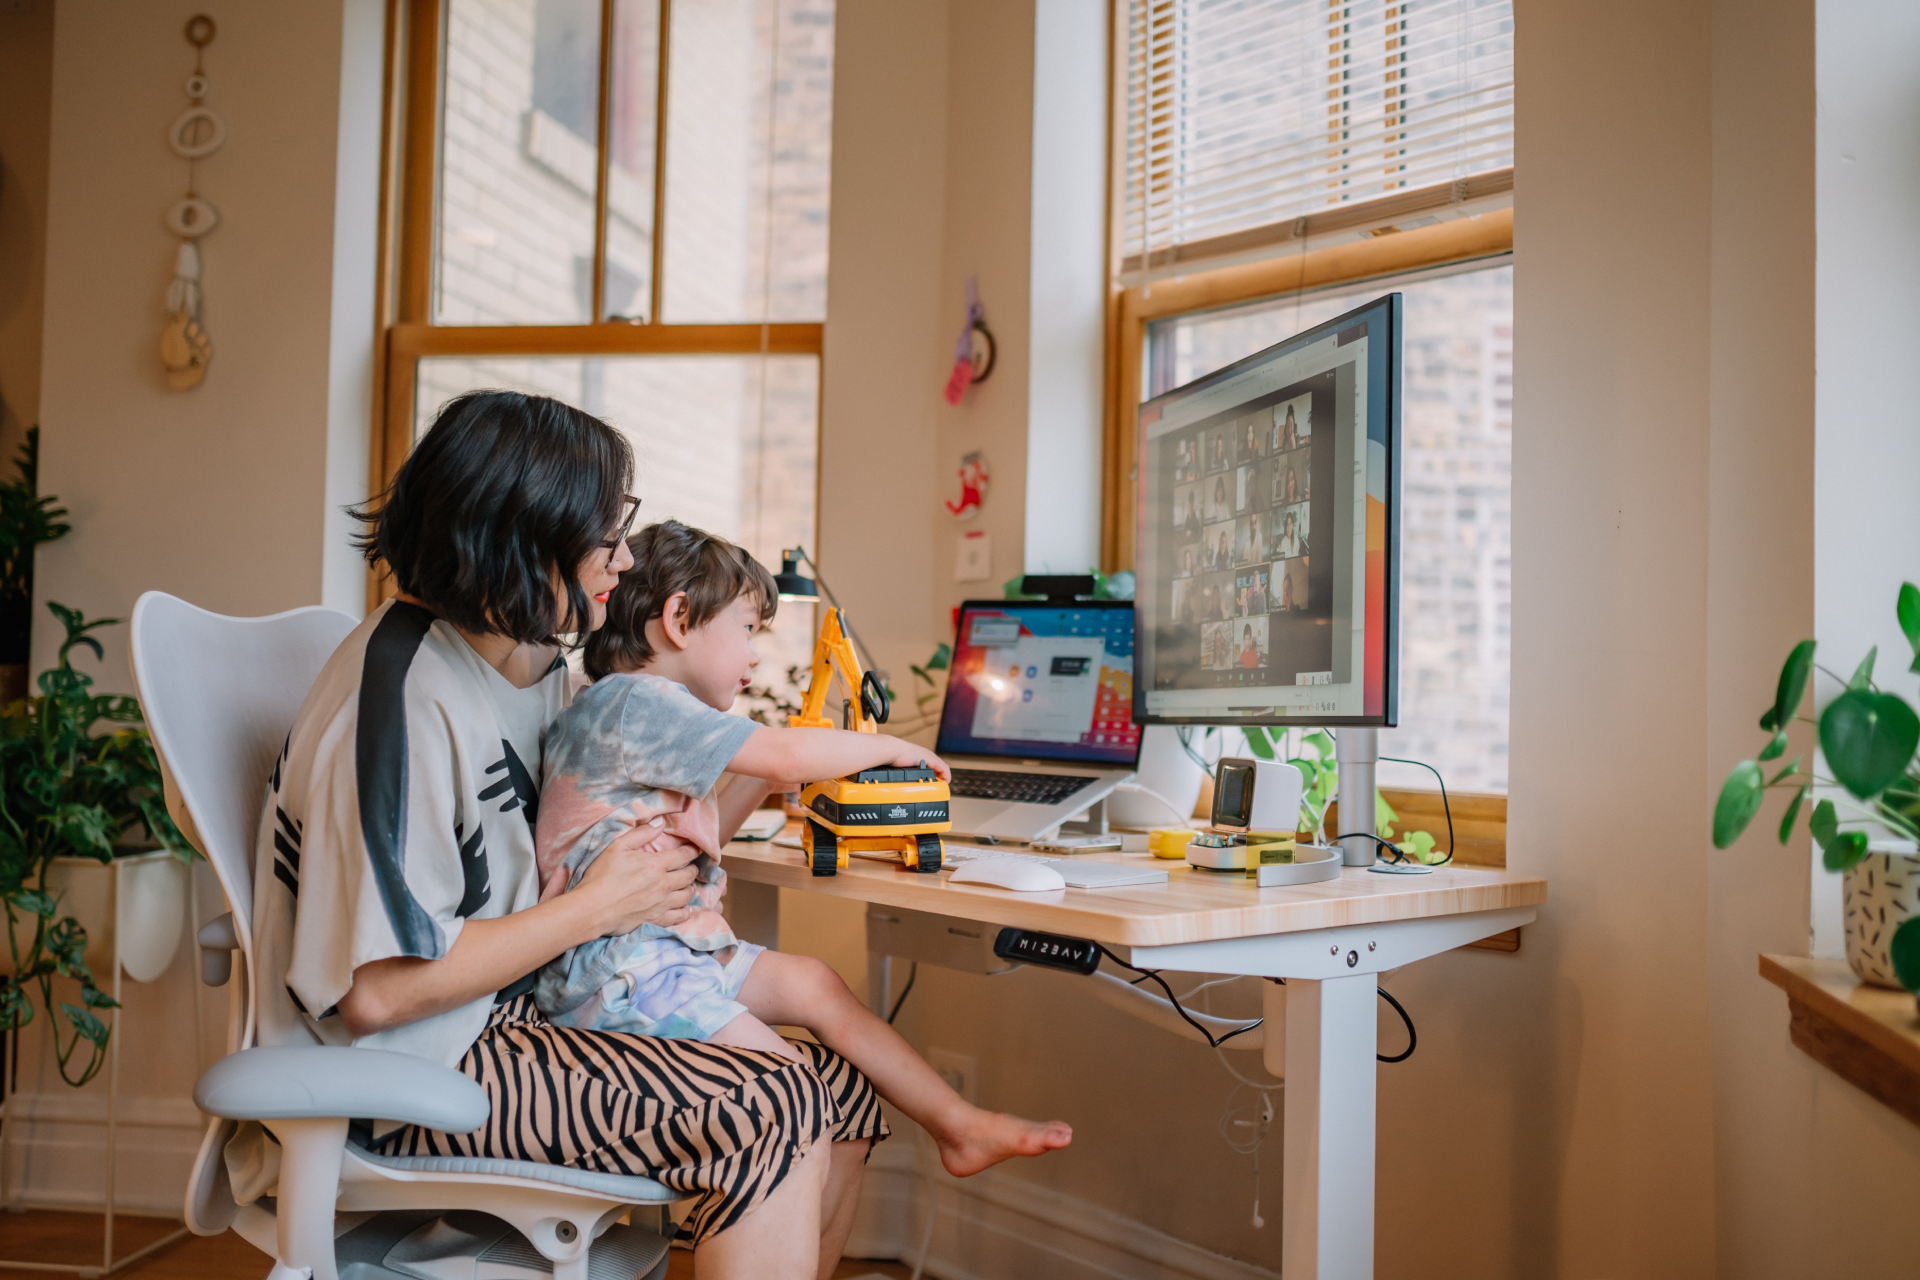 Liz Gilmore, Creative Director of Brand Studio at Dropbox, works remotely with her son while attending a Zoom meeting